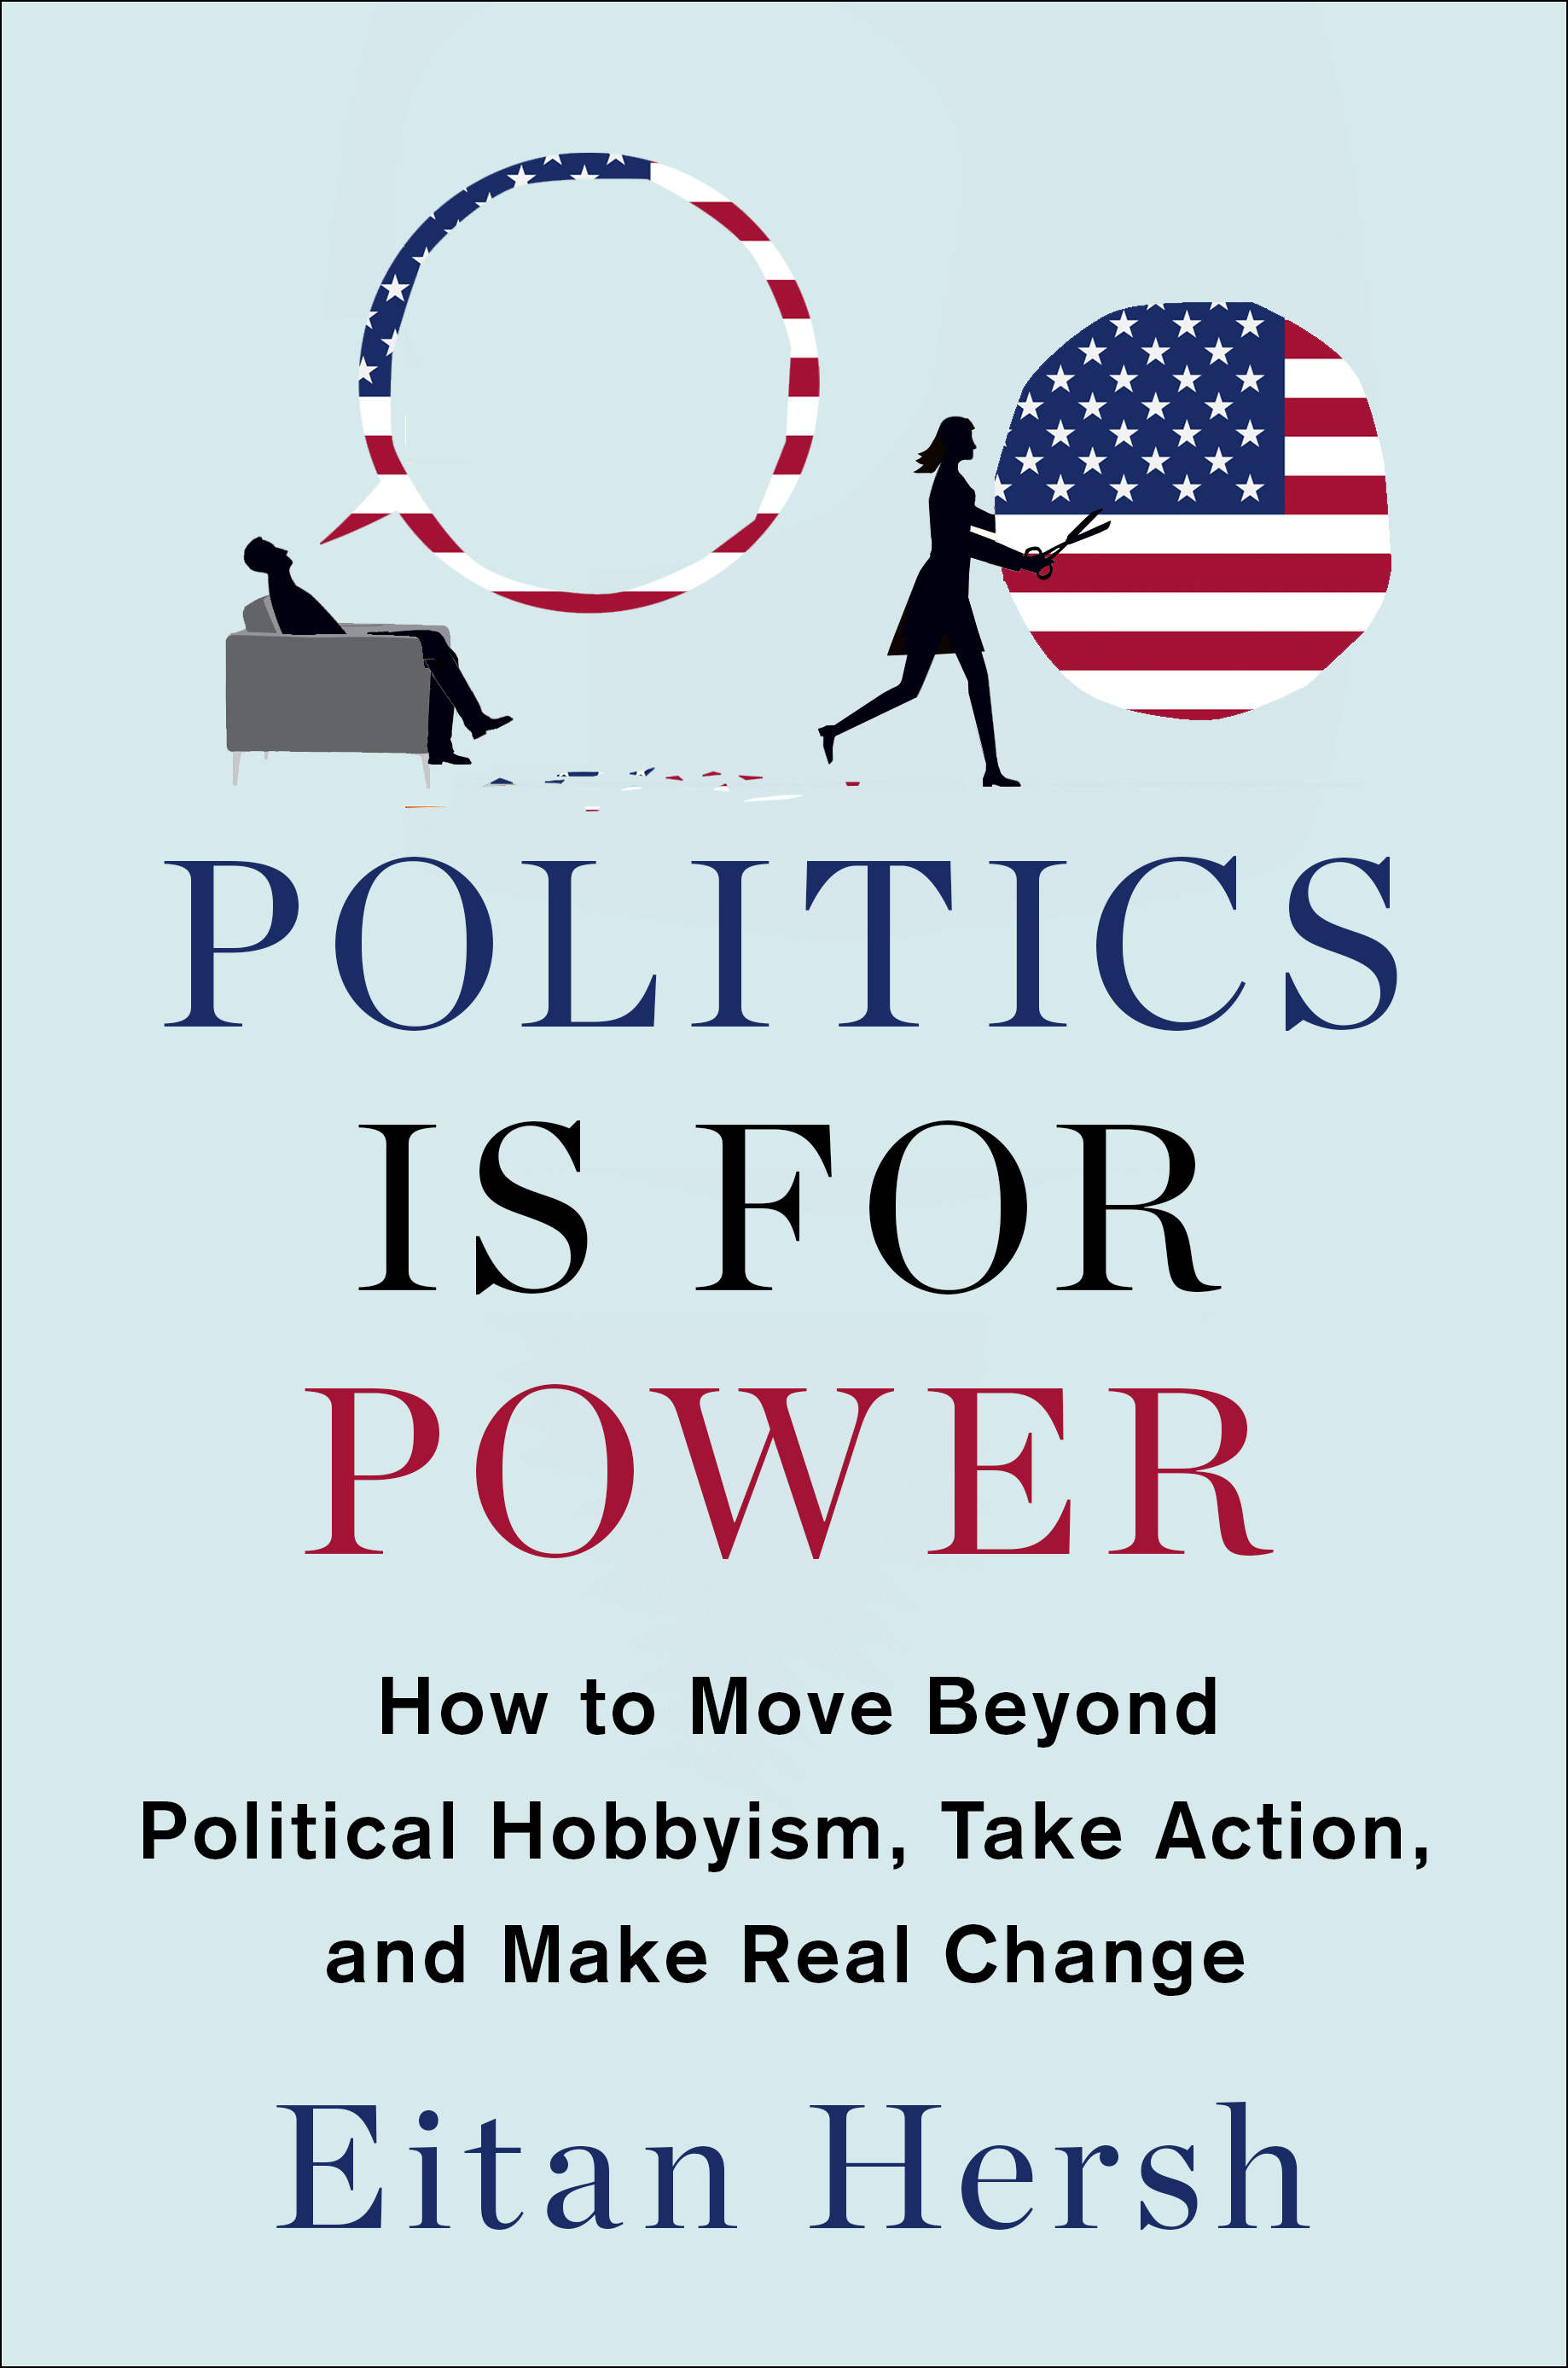 Book Launch: Politics Is For Power by Eitan Hersh